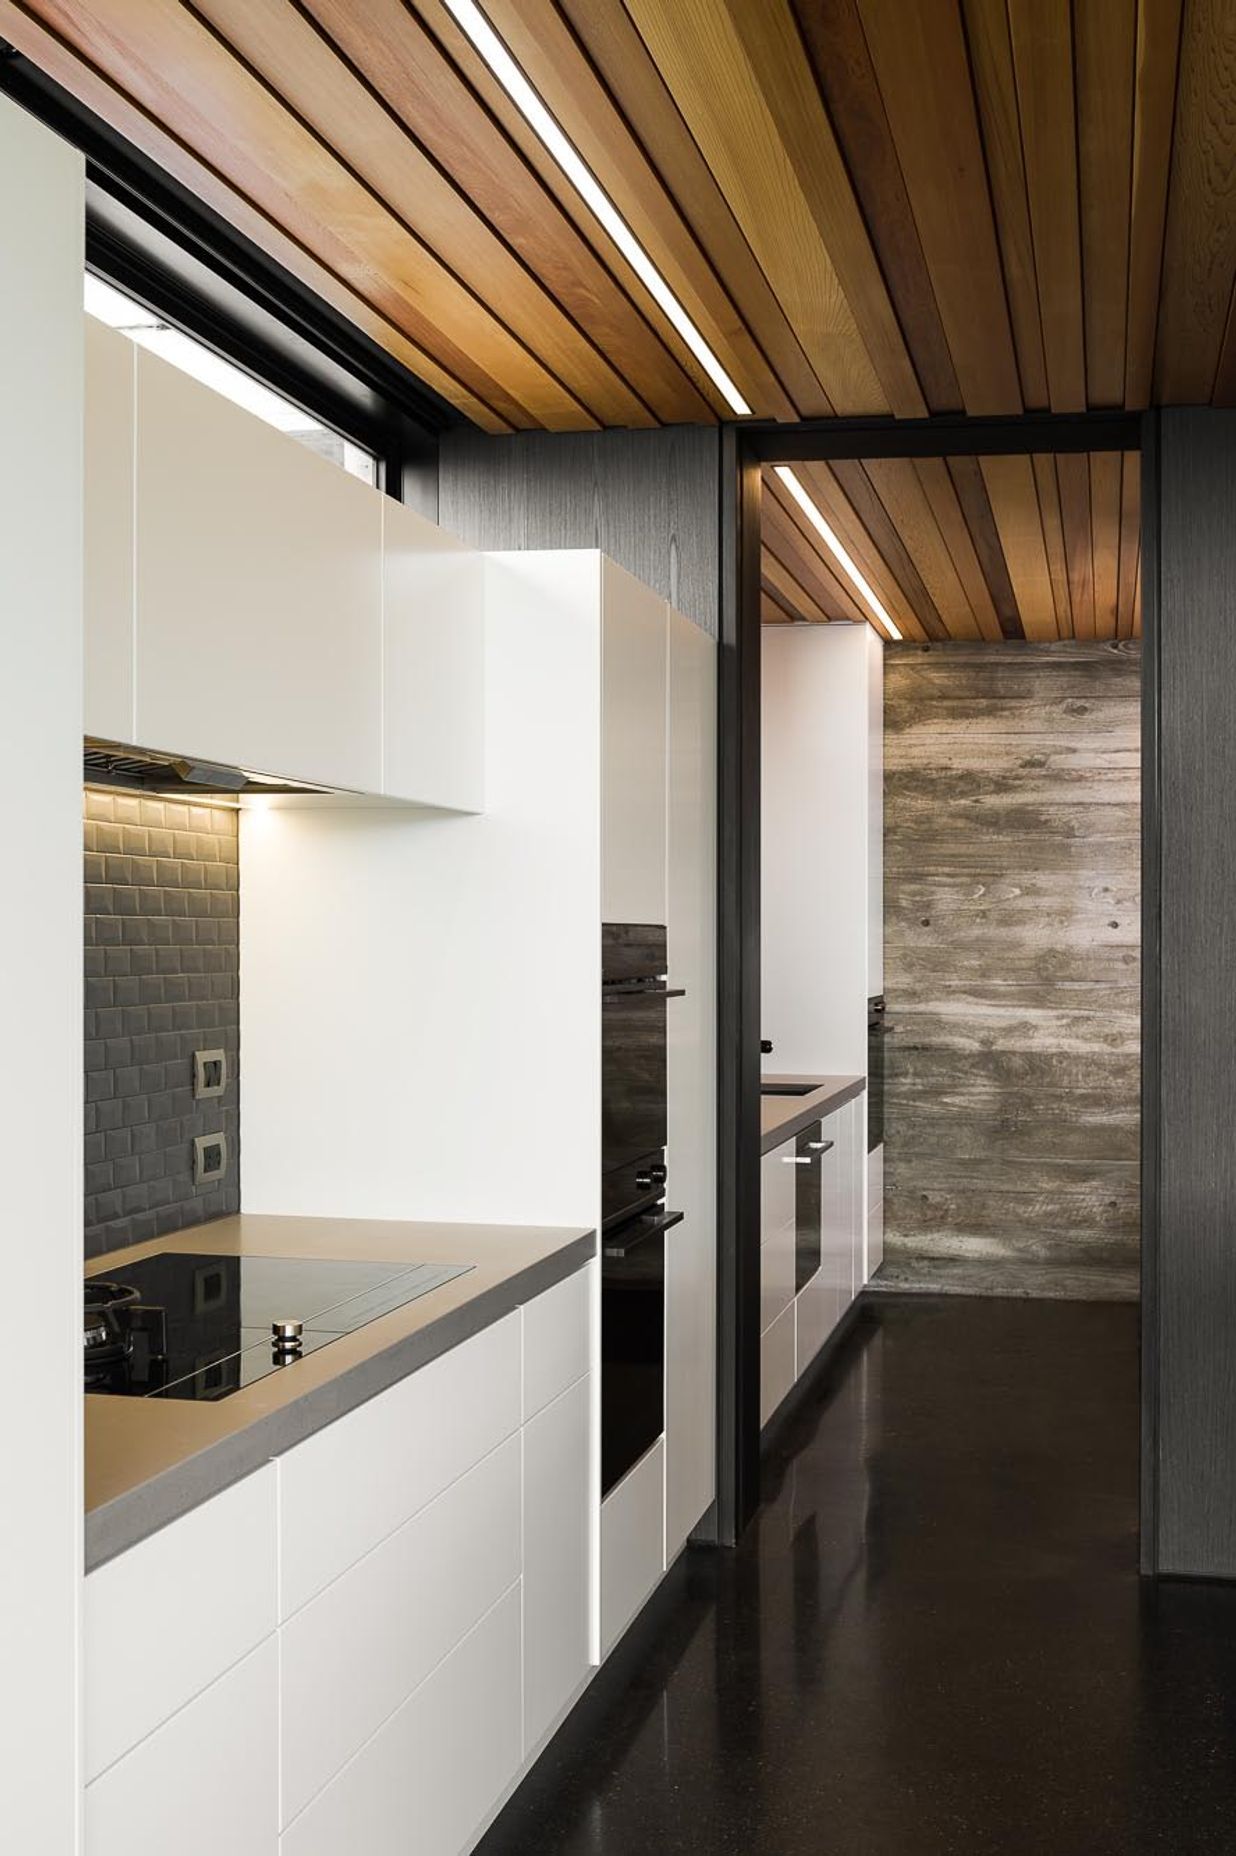 The simplicity of the kitchen mimics the overall simplicity of the building's design.